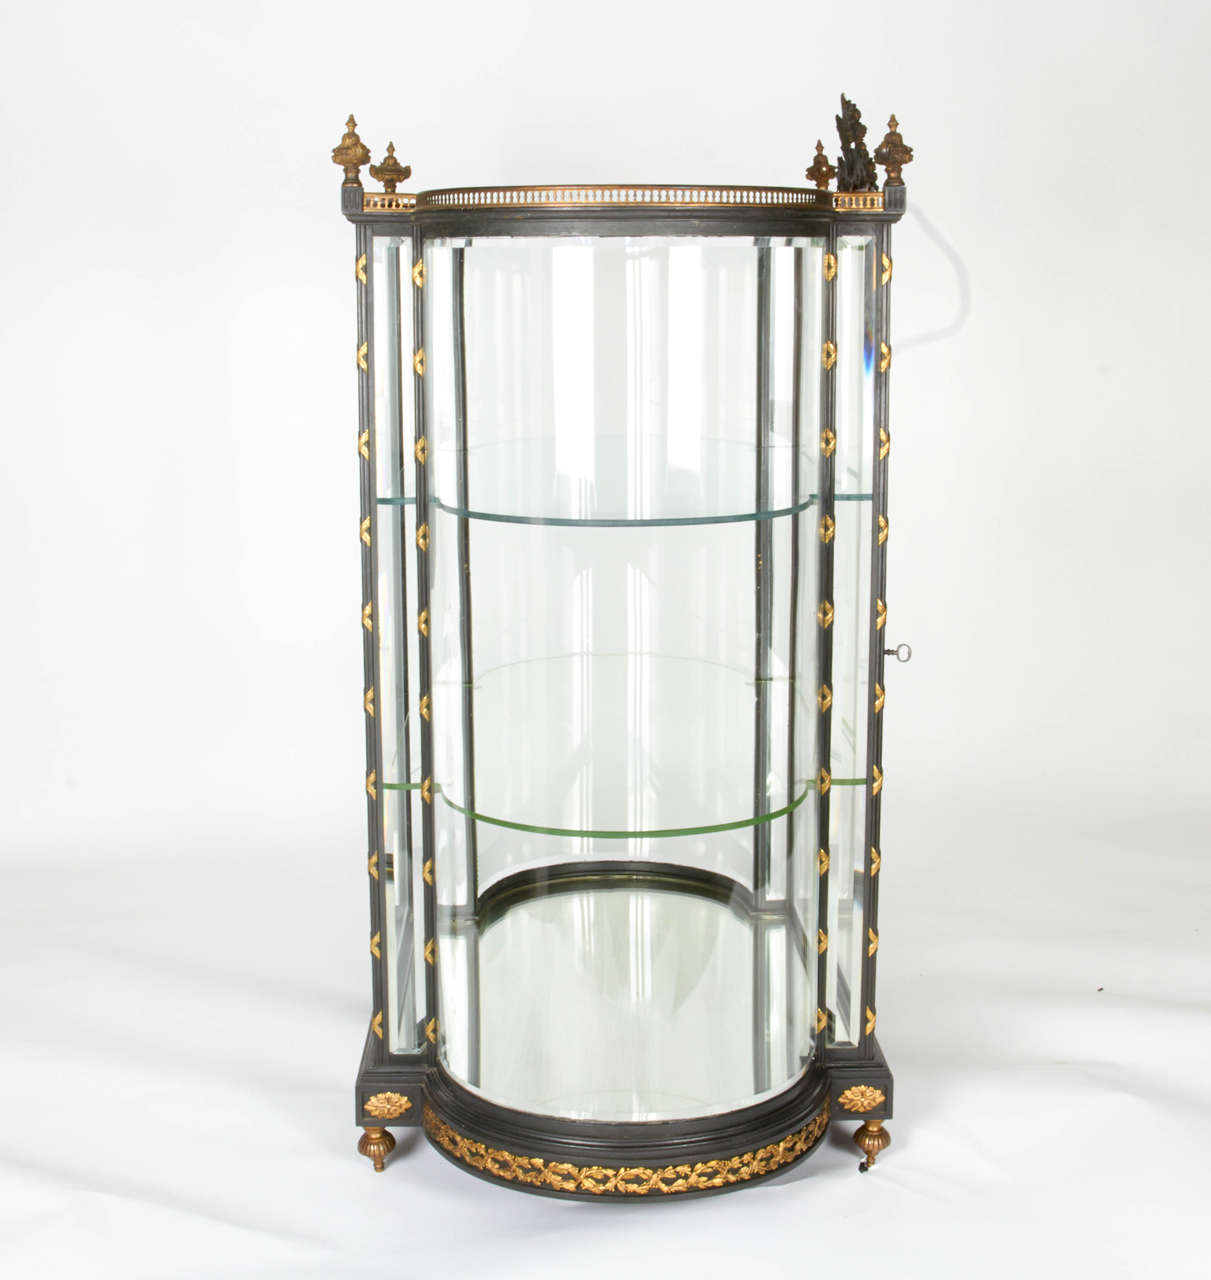 20th Century Antique Glass, Bronze and Steel Jewelry Showcase or Vitrine For Sale